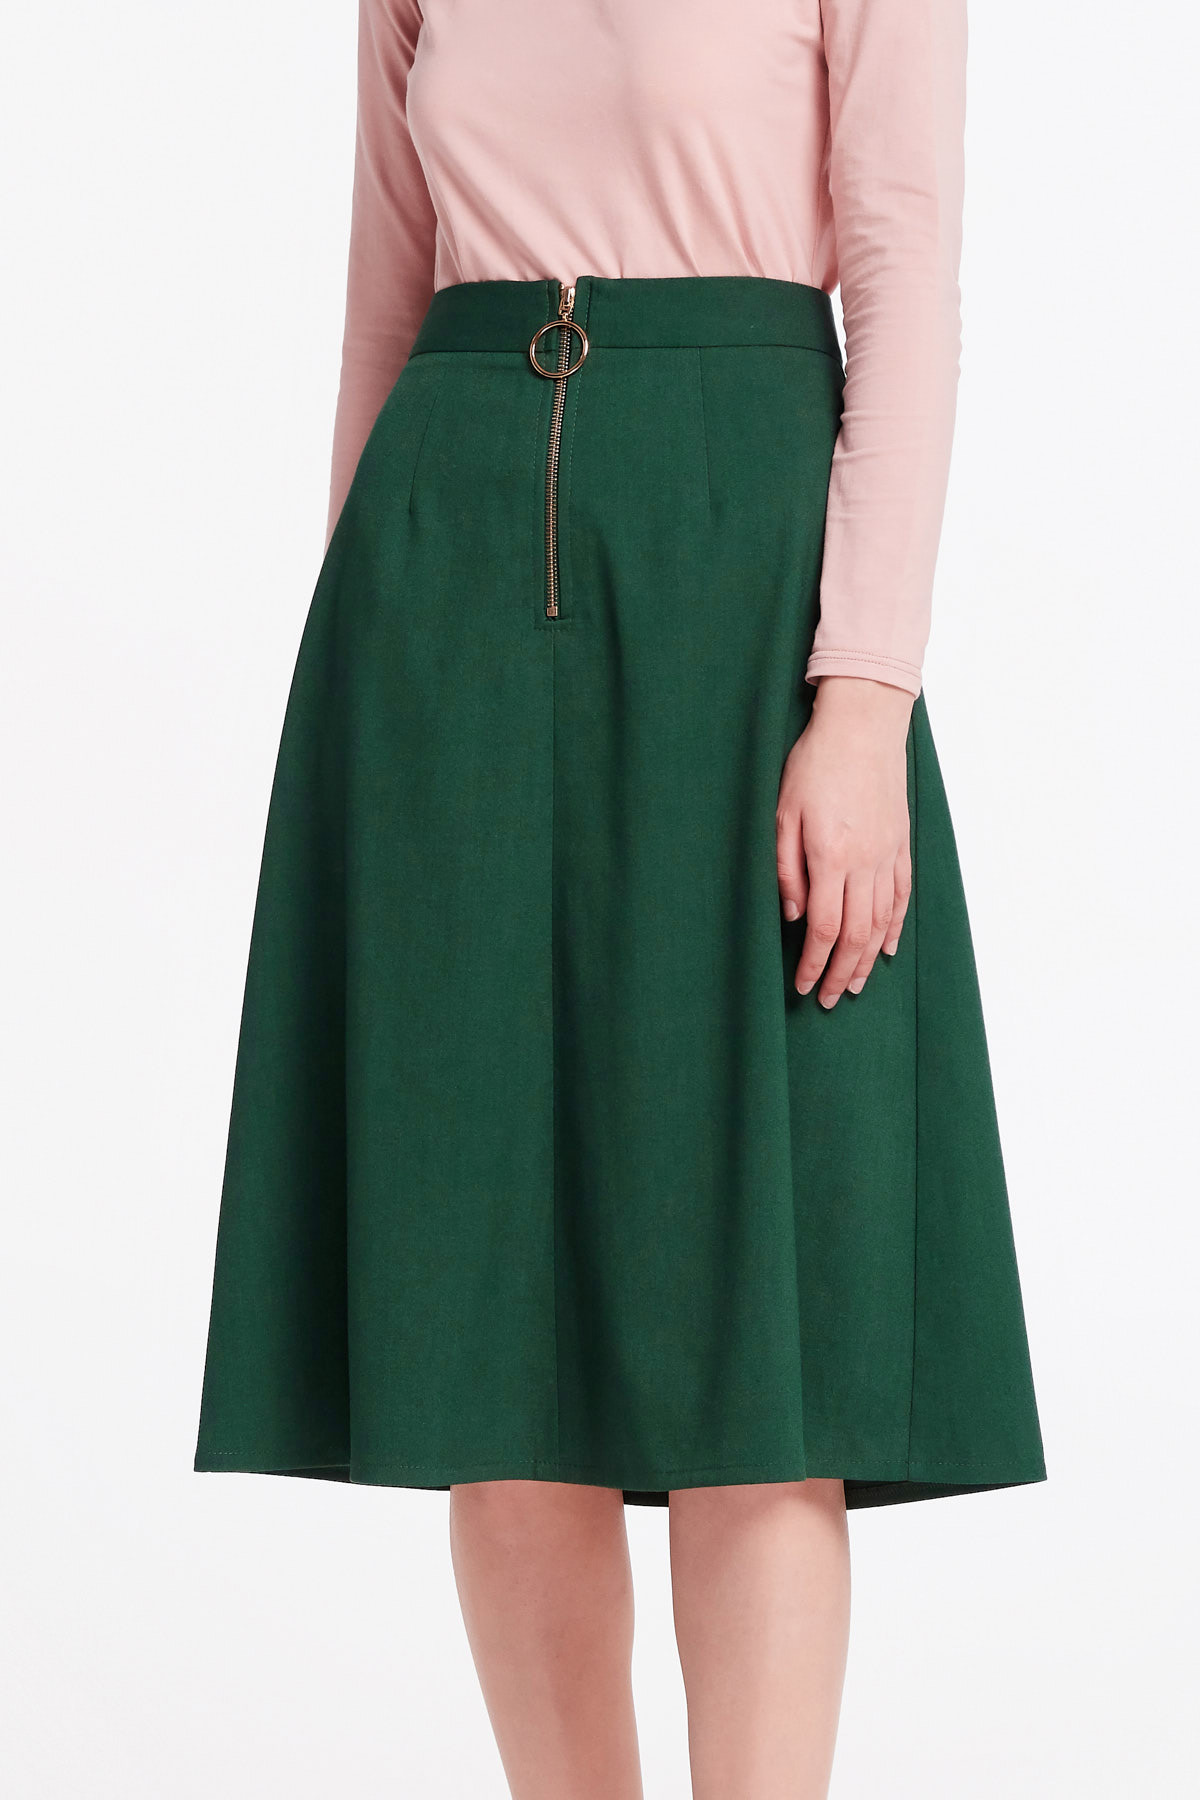 Green midi dress with a front zip, photo 12